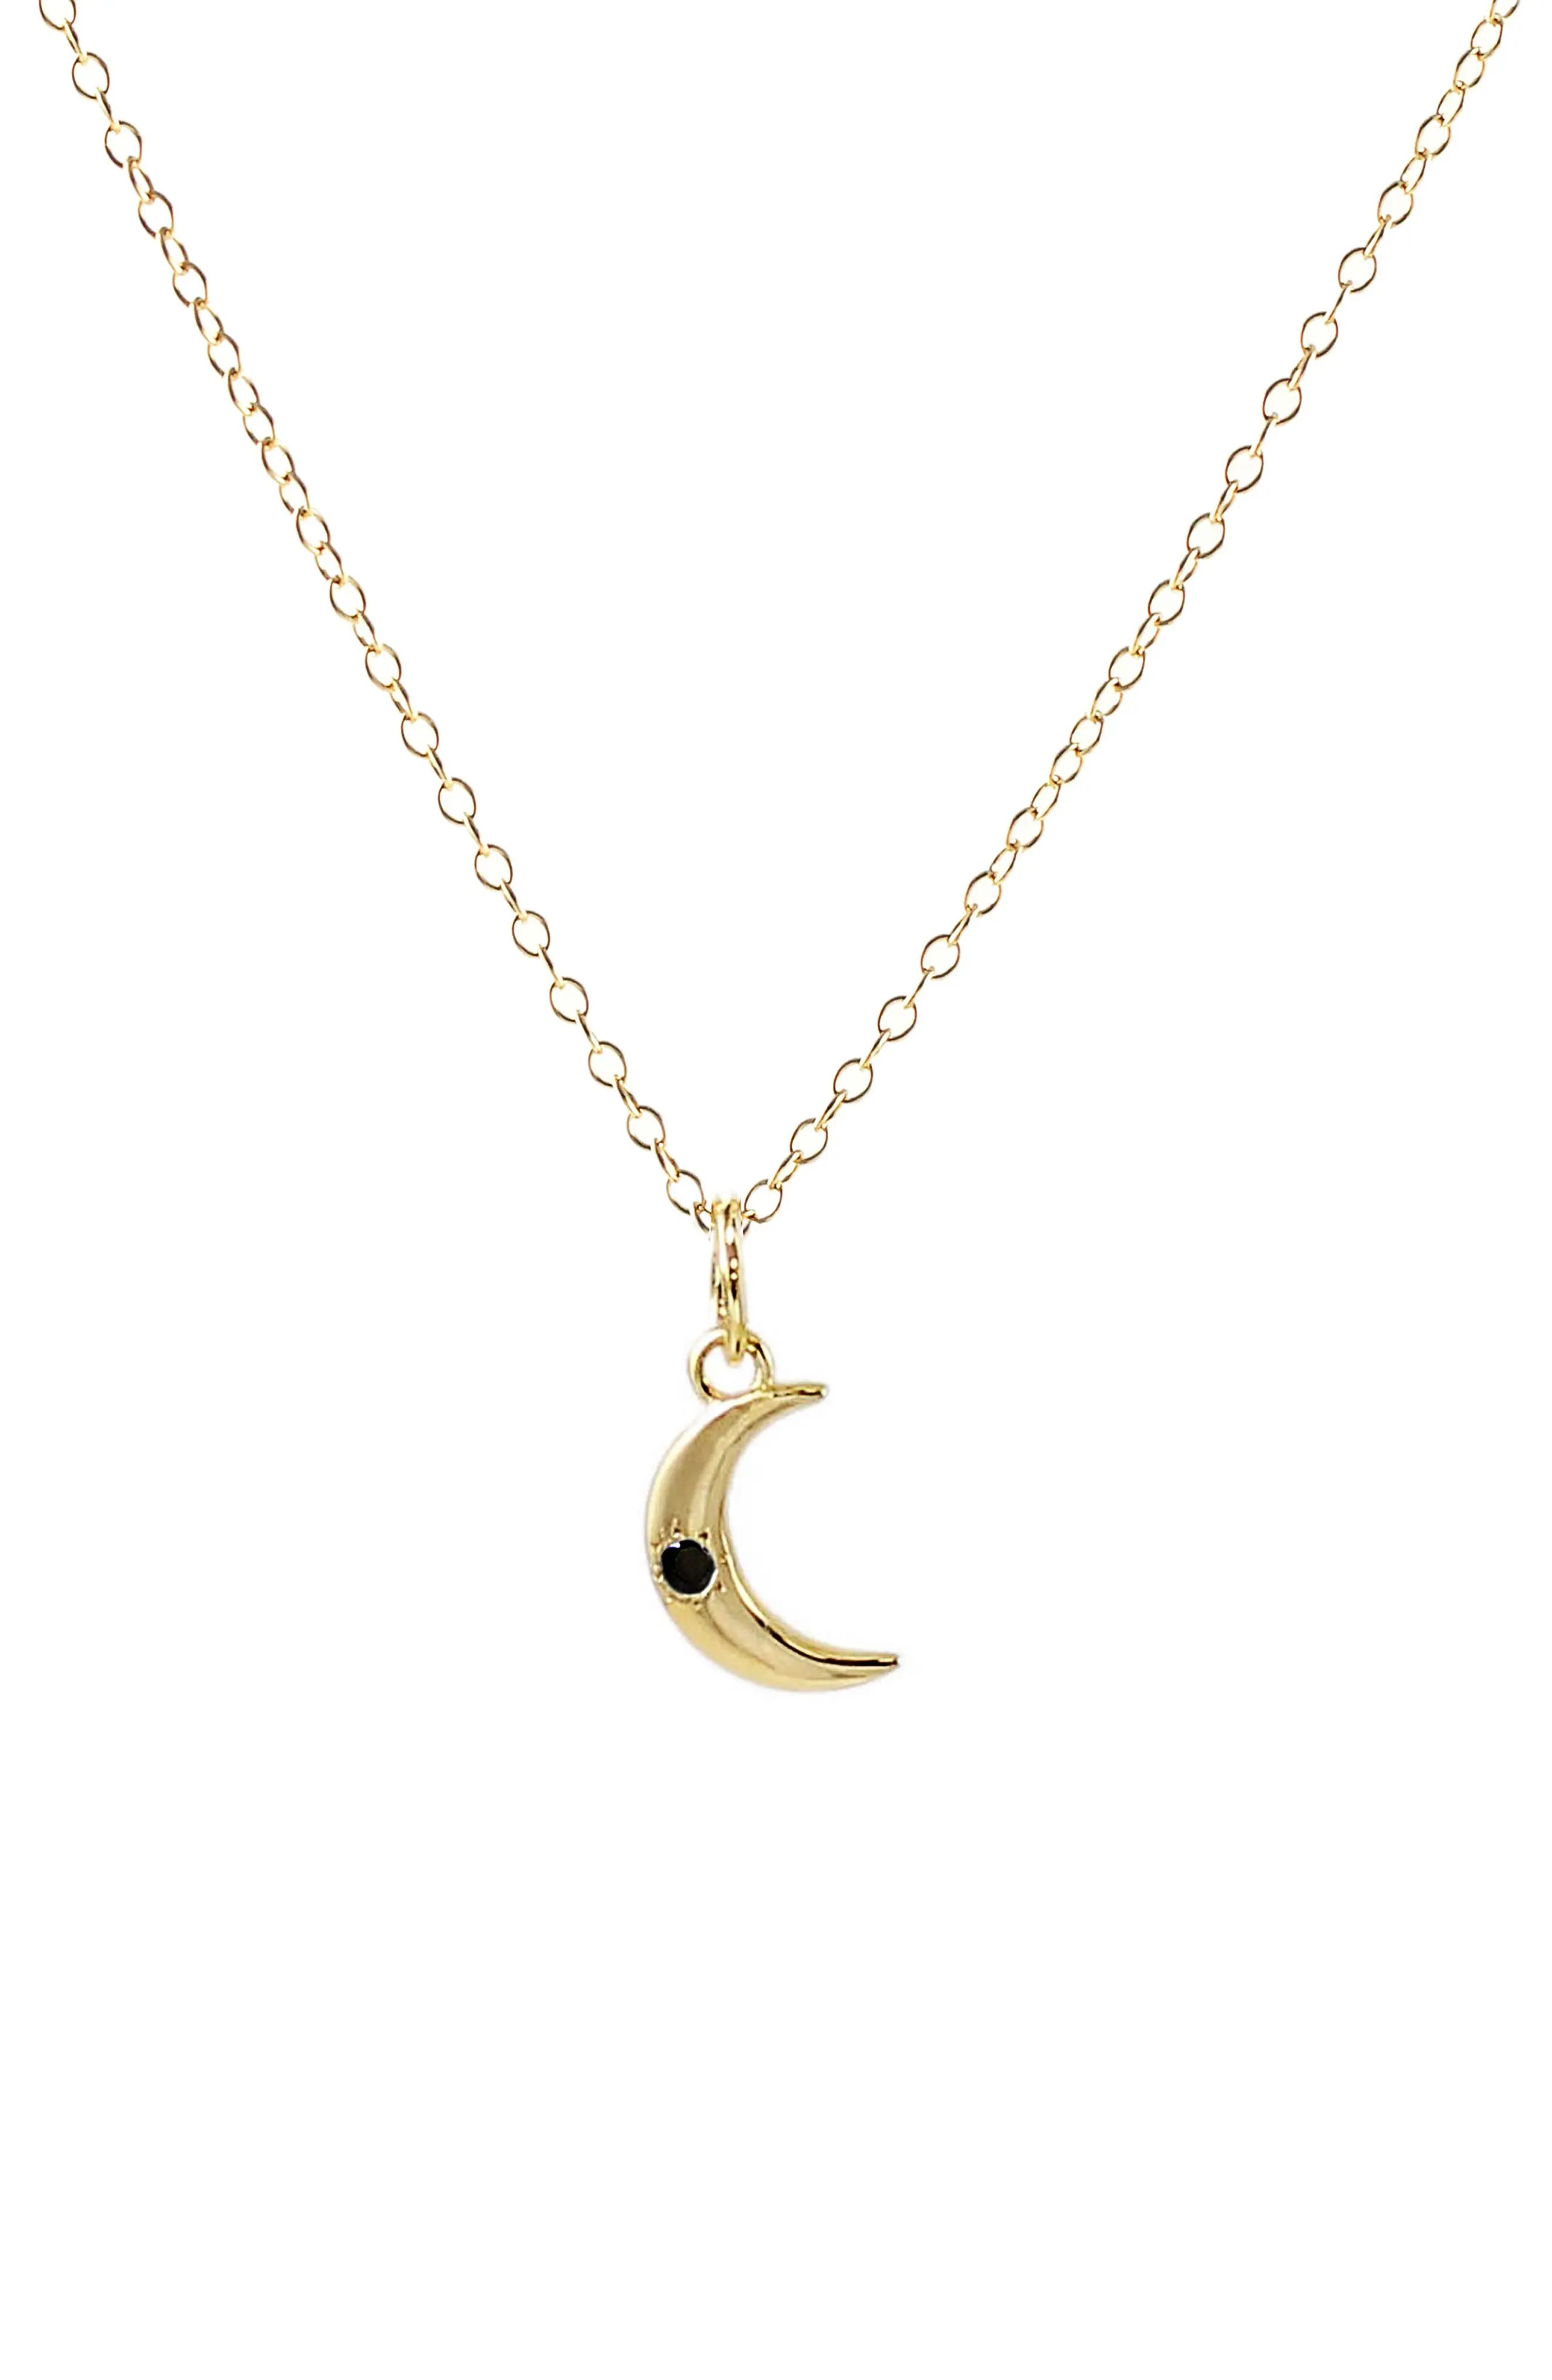 Stone Crescent Moon Charm Necklace | Nordstrom